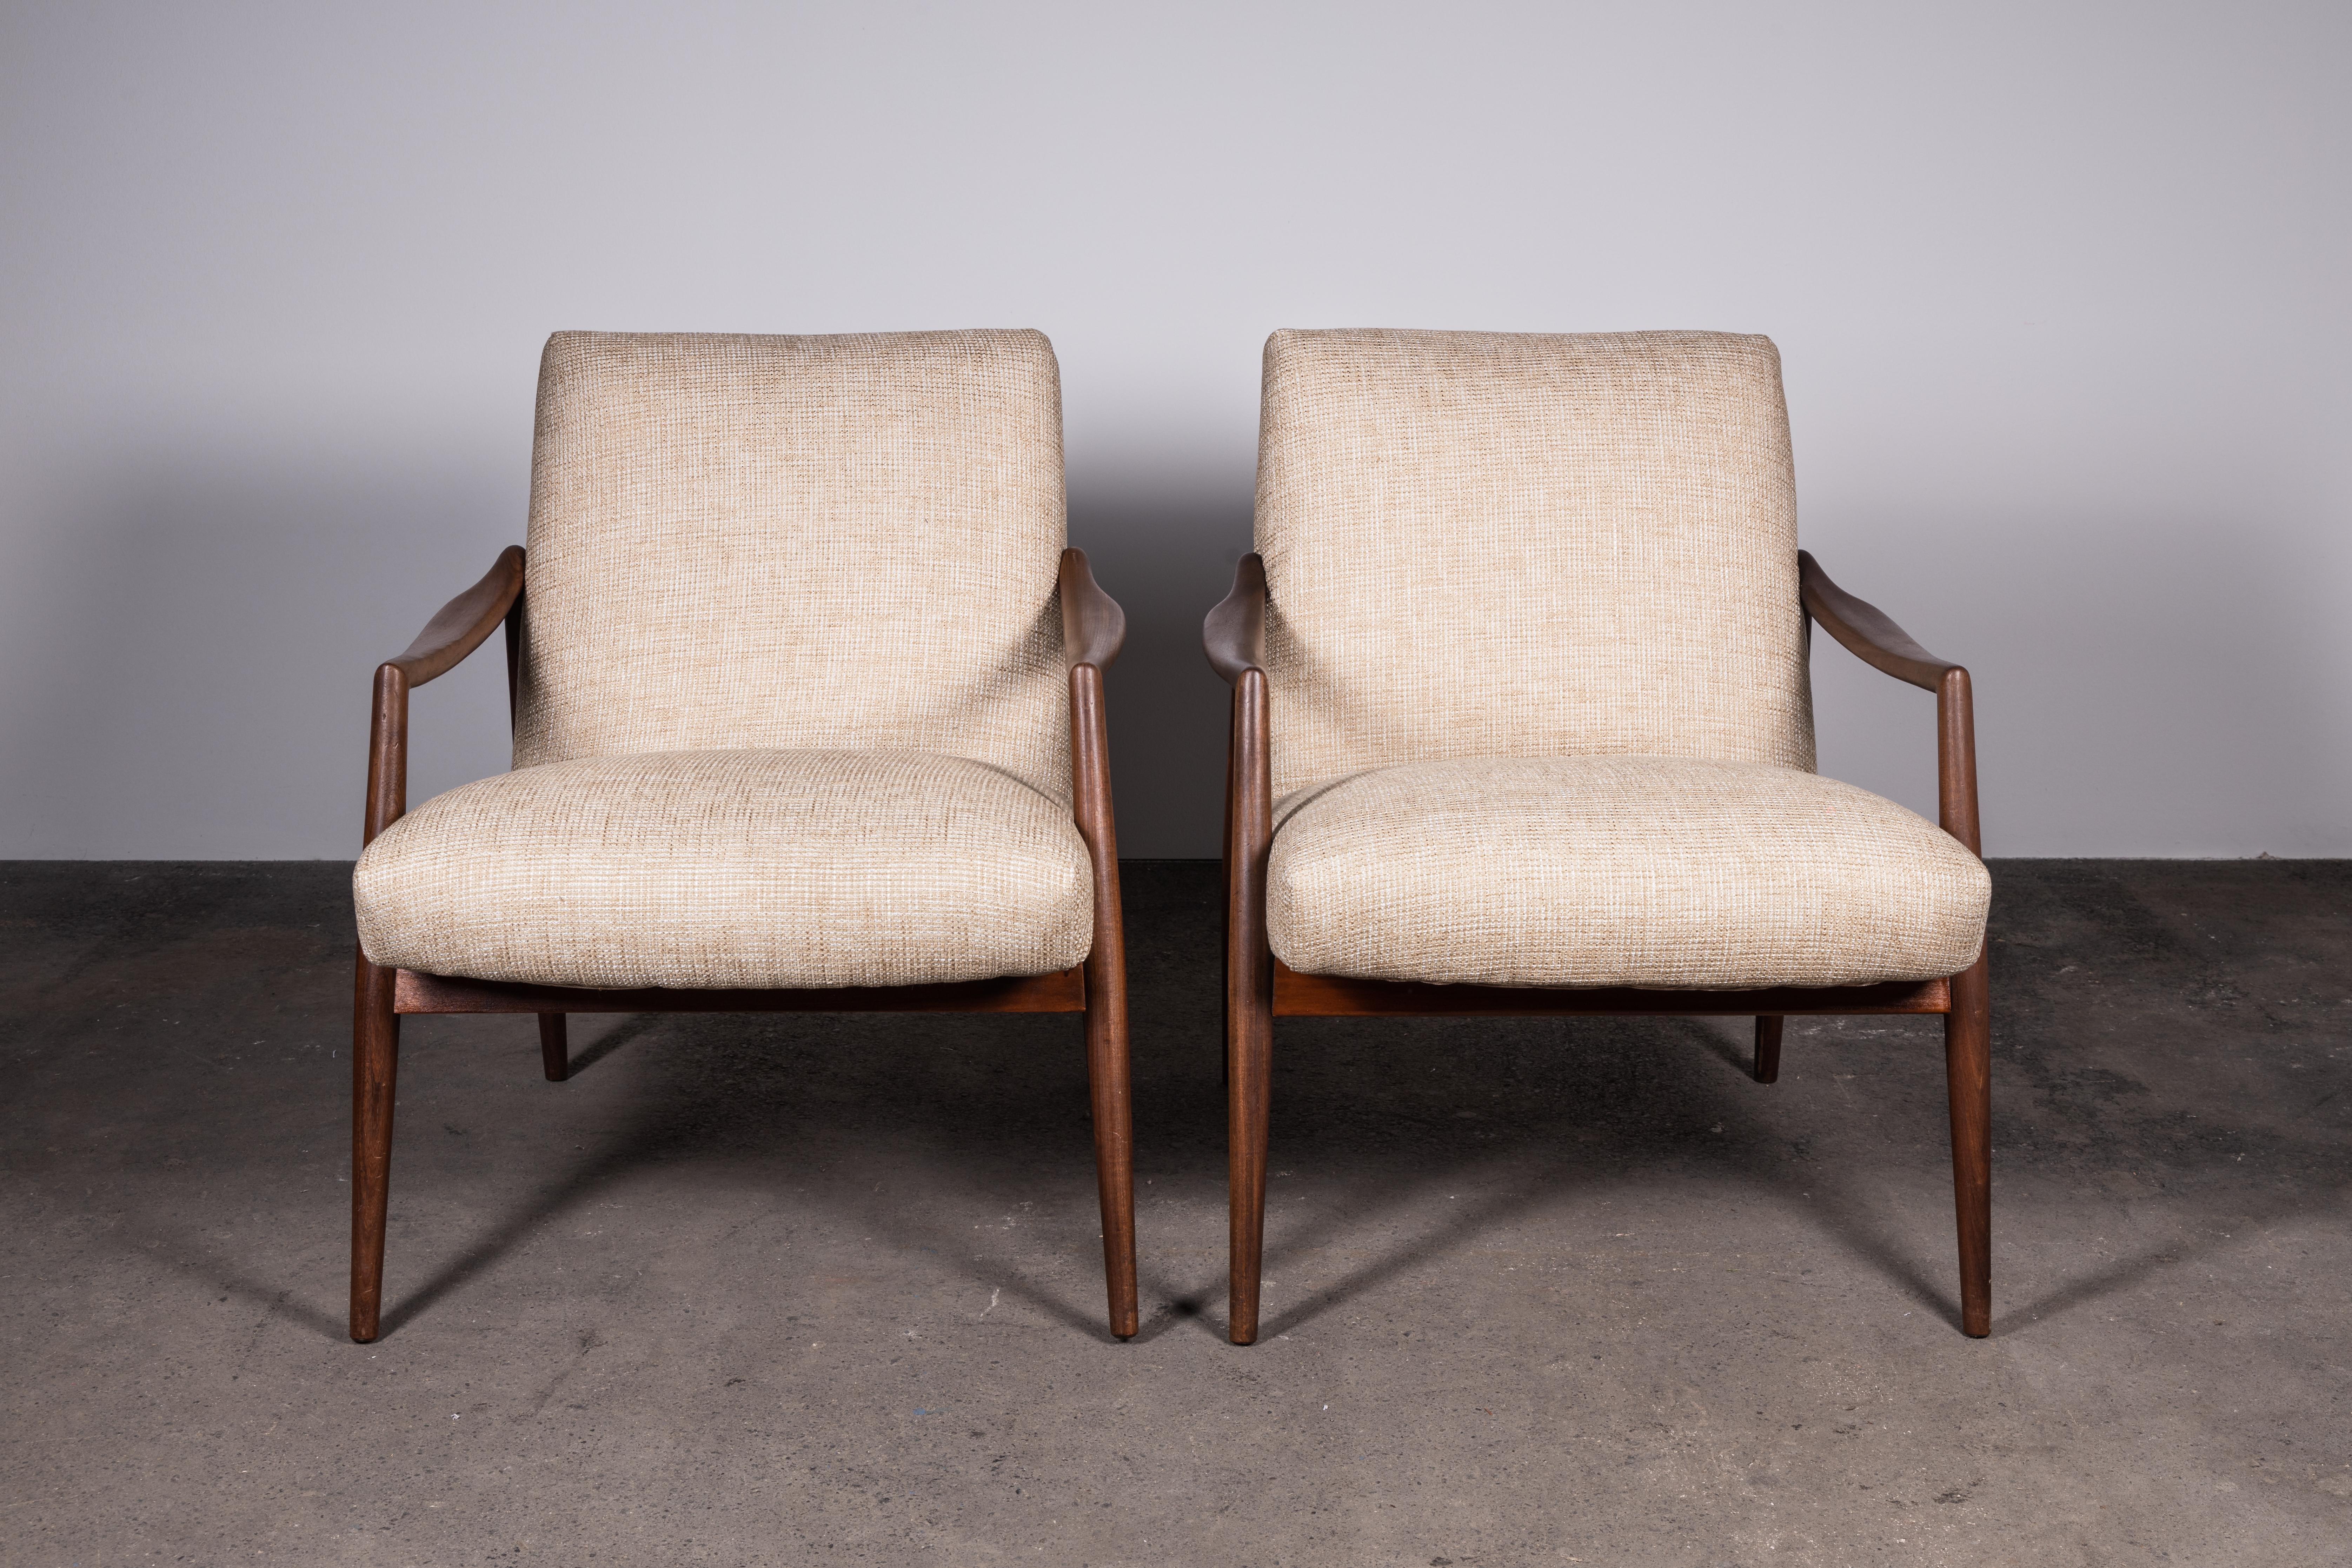 The epitome of Mid-Century Modern refinement. This iconic pair of low-back teak armchairs are some of the best design and craftsmanship of the era. 

The sculpted teak wood, elegantly darkened with age, is complemented by chic tweed upholstery à